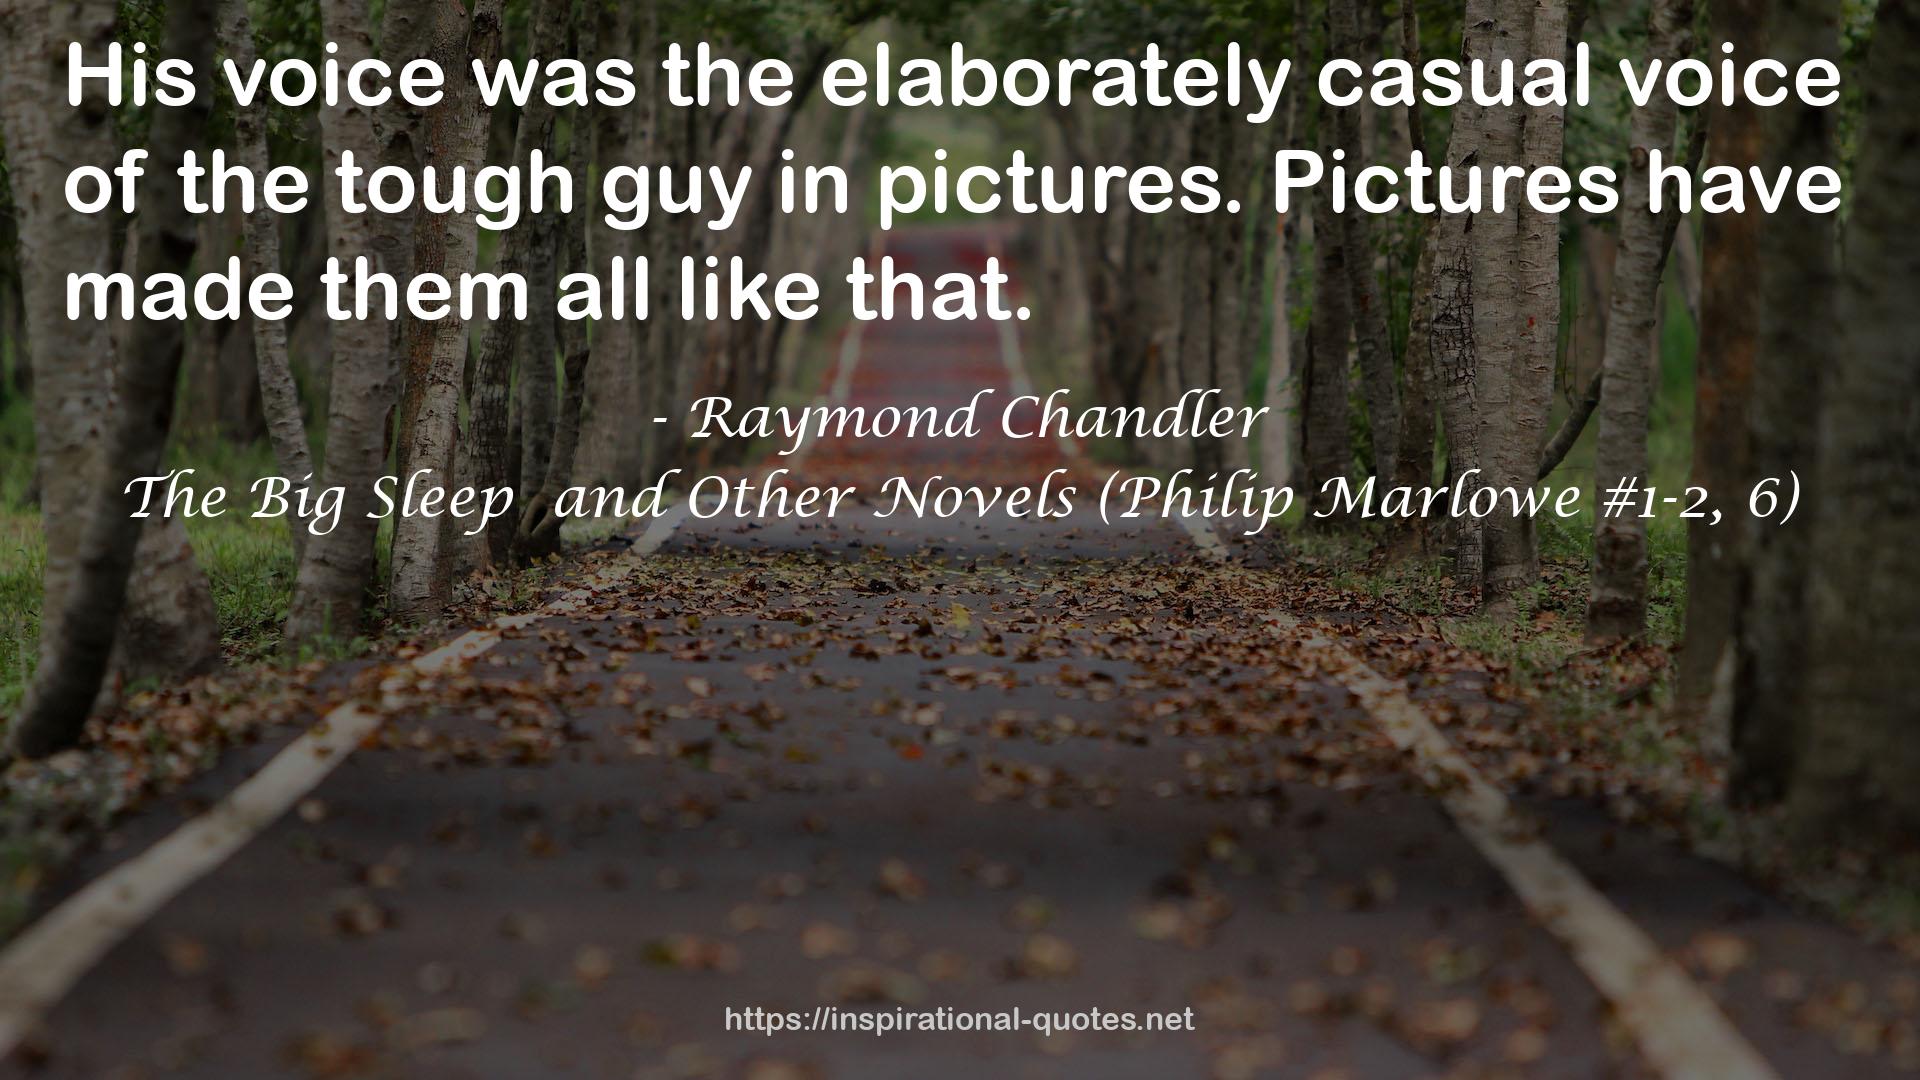 The Big Sleep  and Other Novels (Philip Marlowe #1-2, 6) QUOTES